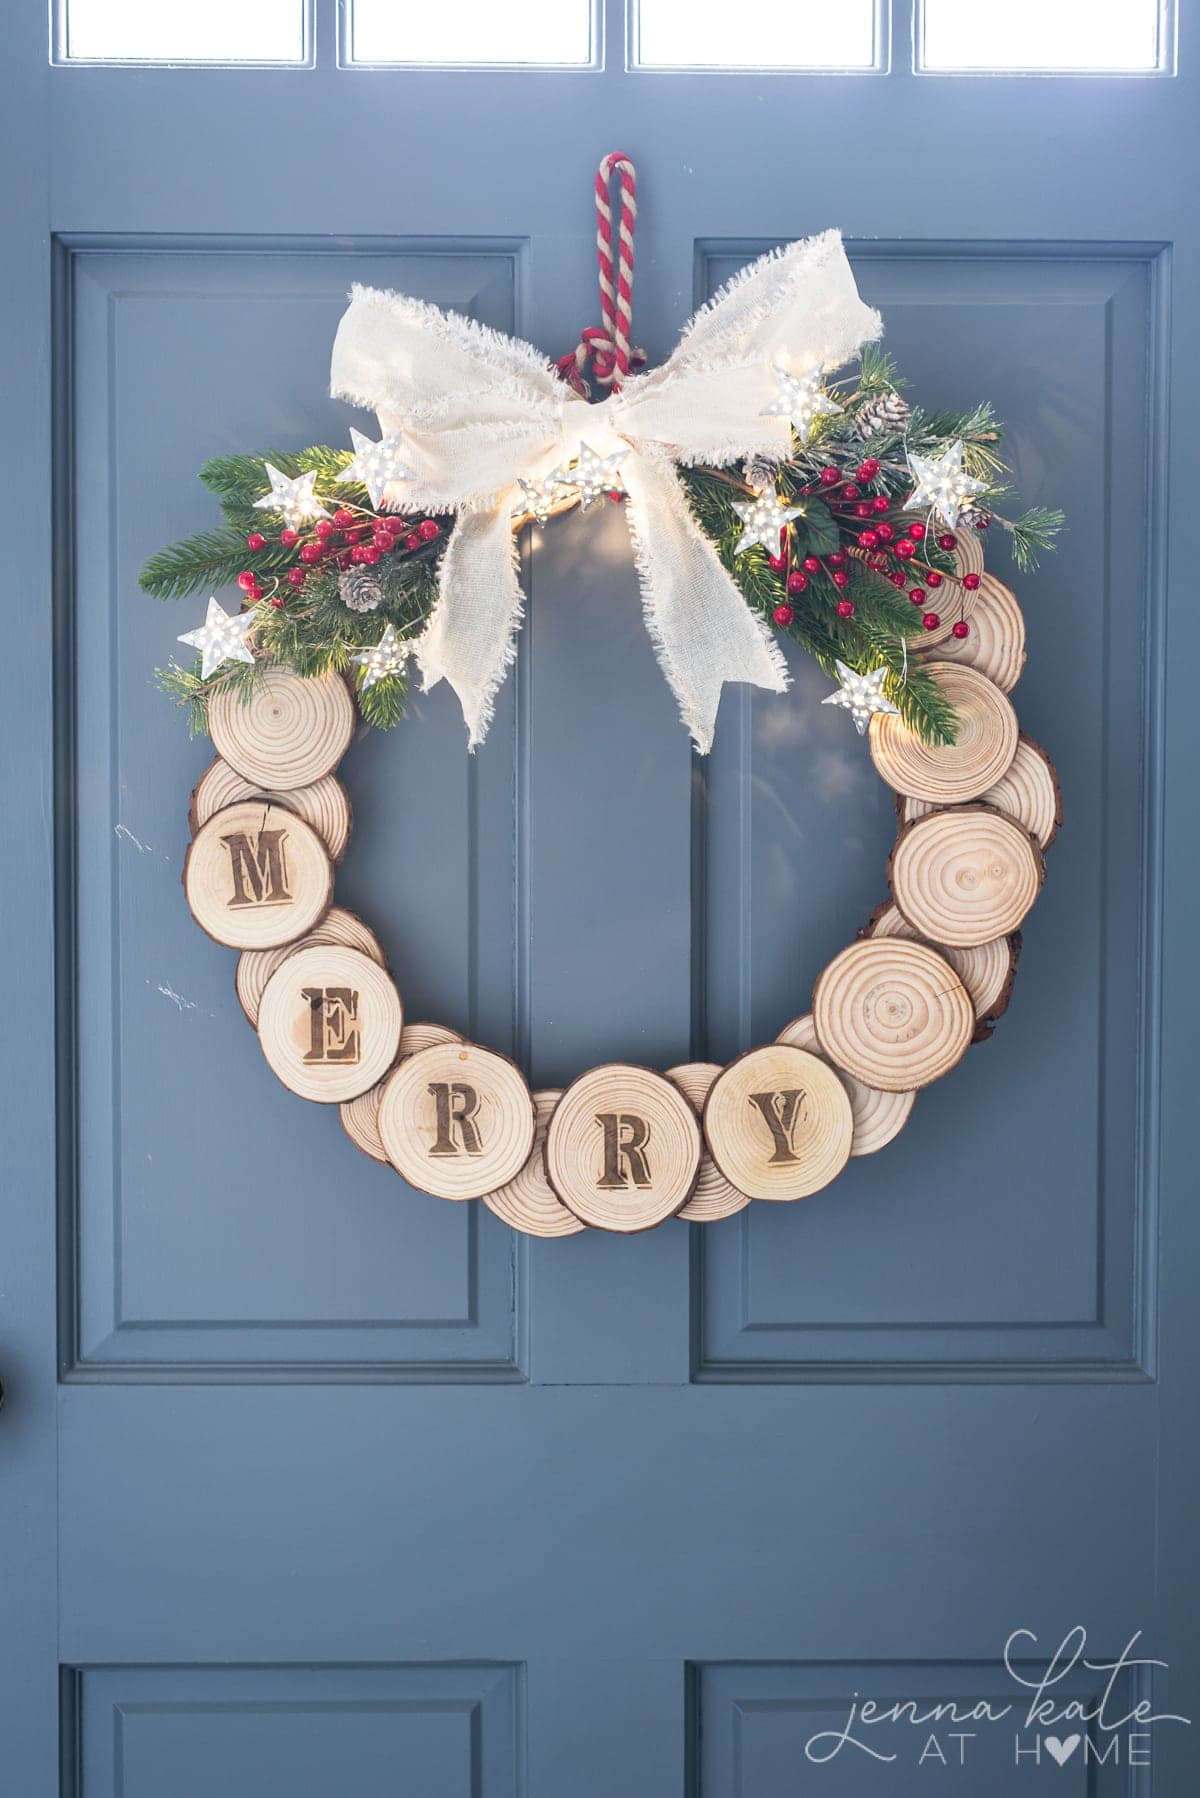 How to Make an Easy DIY Wood Slice Holiday Wreath